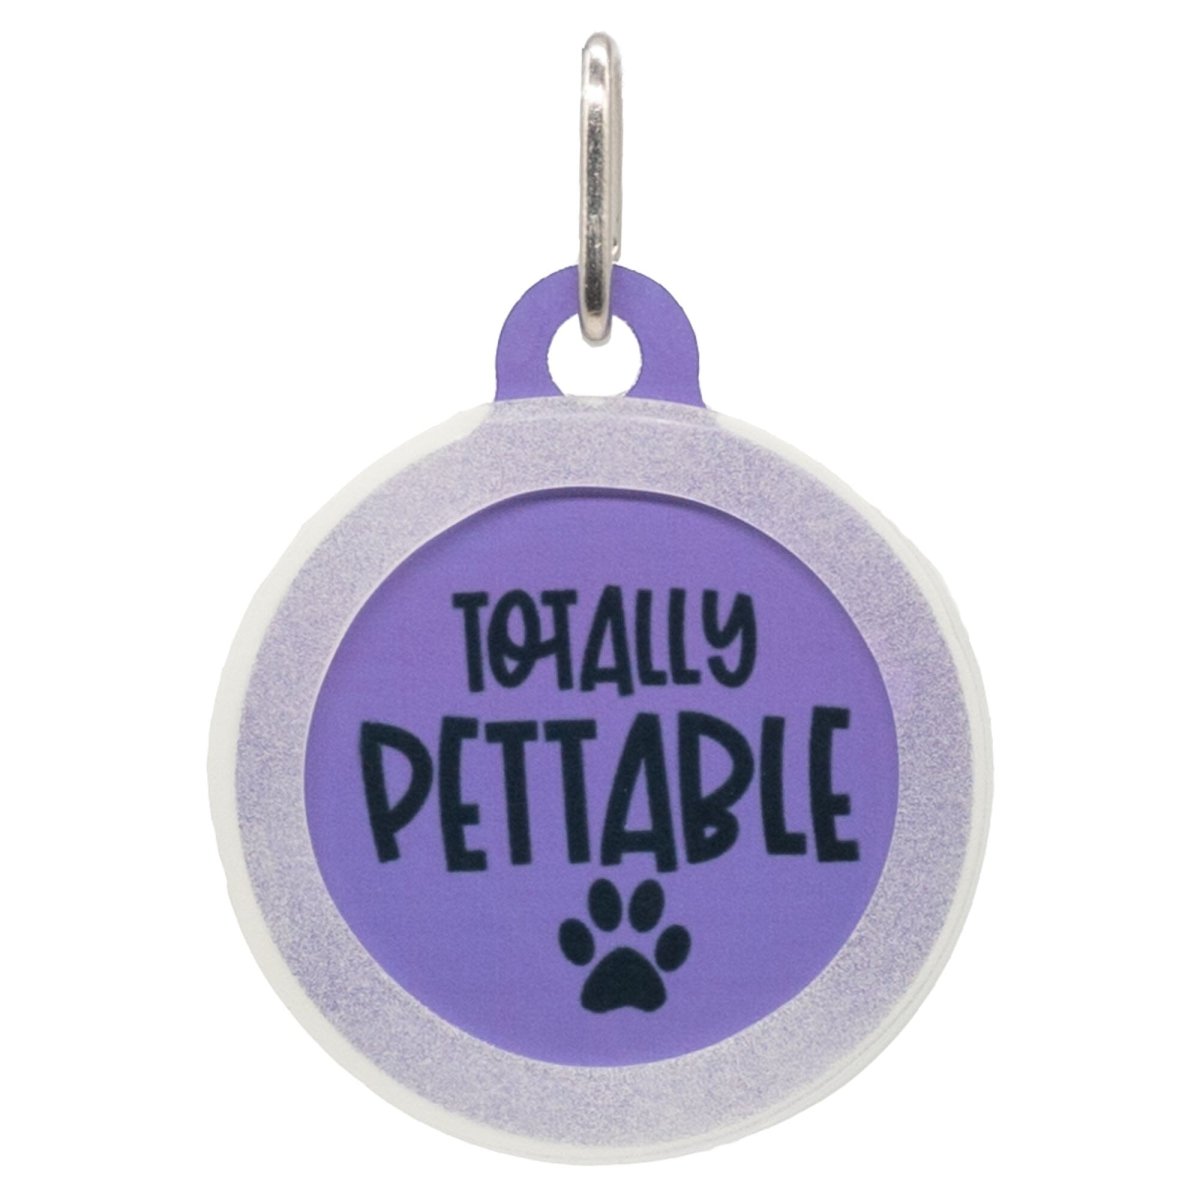 Totally Pettable Name Tag - Oh My Paw'd